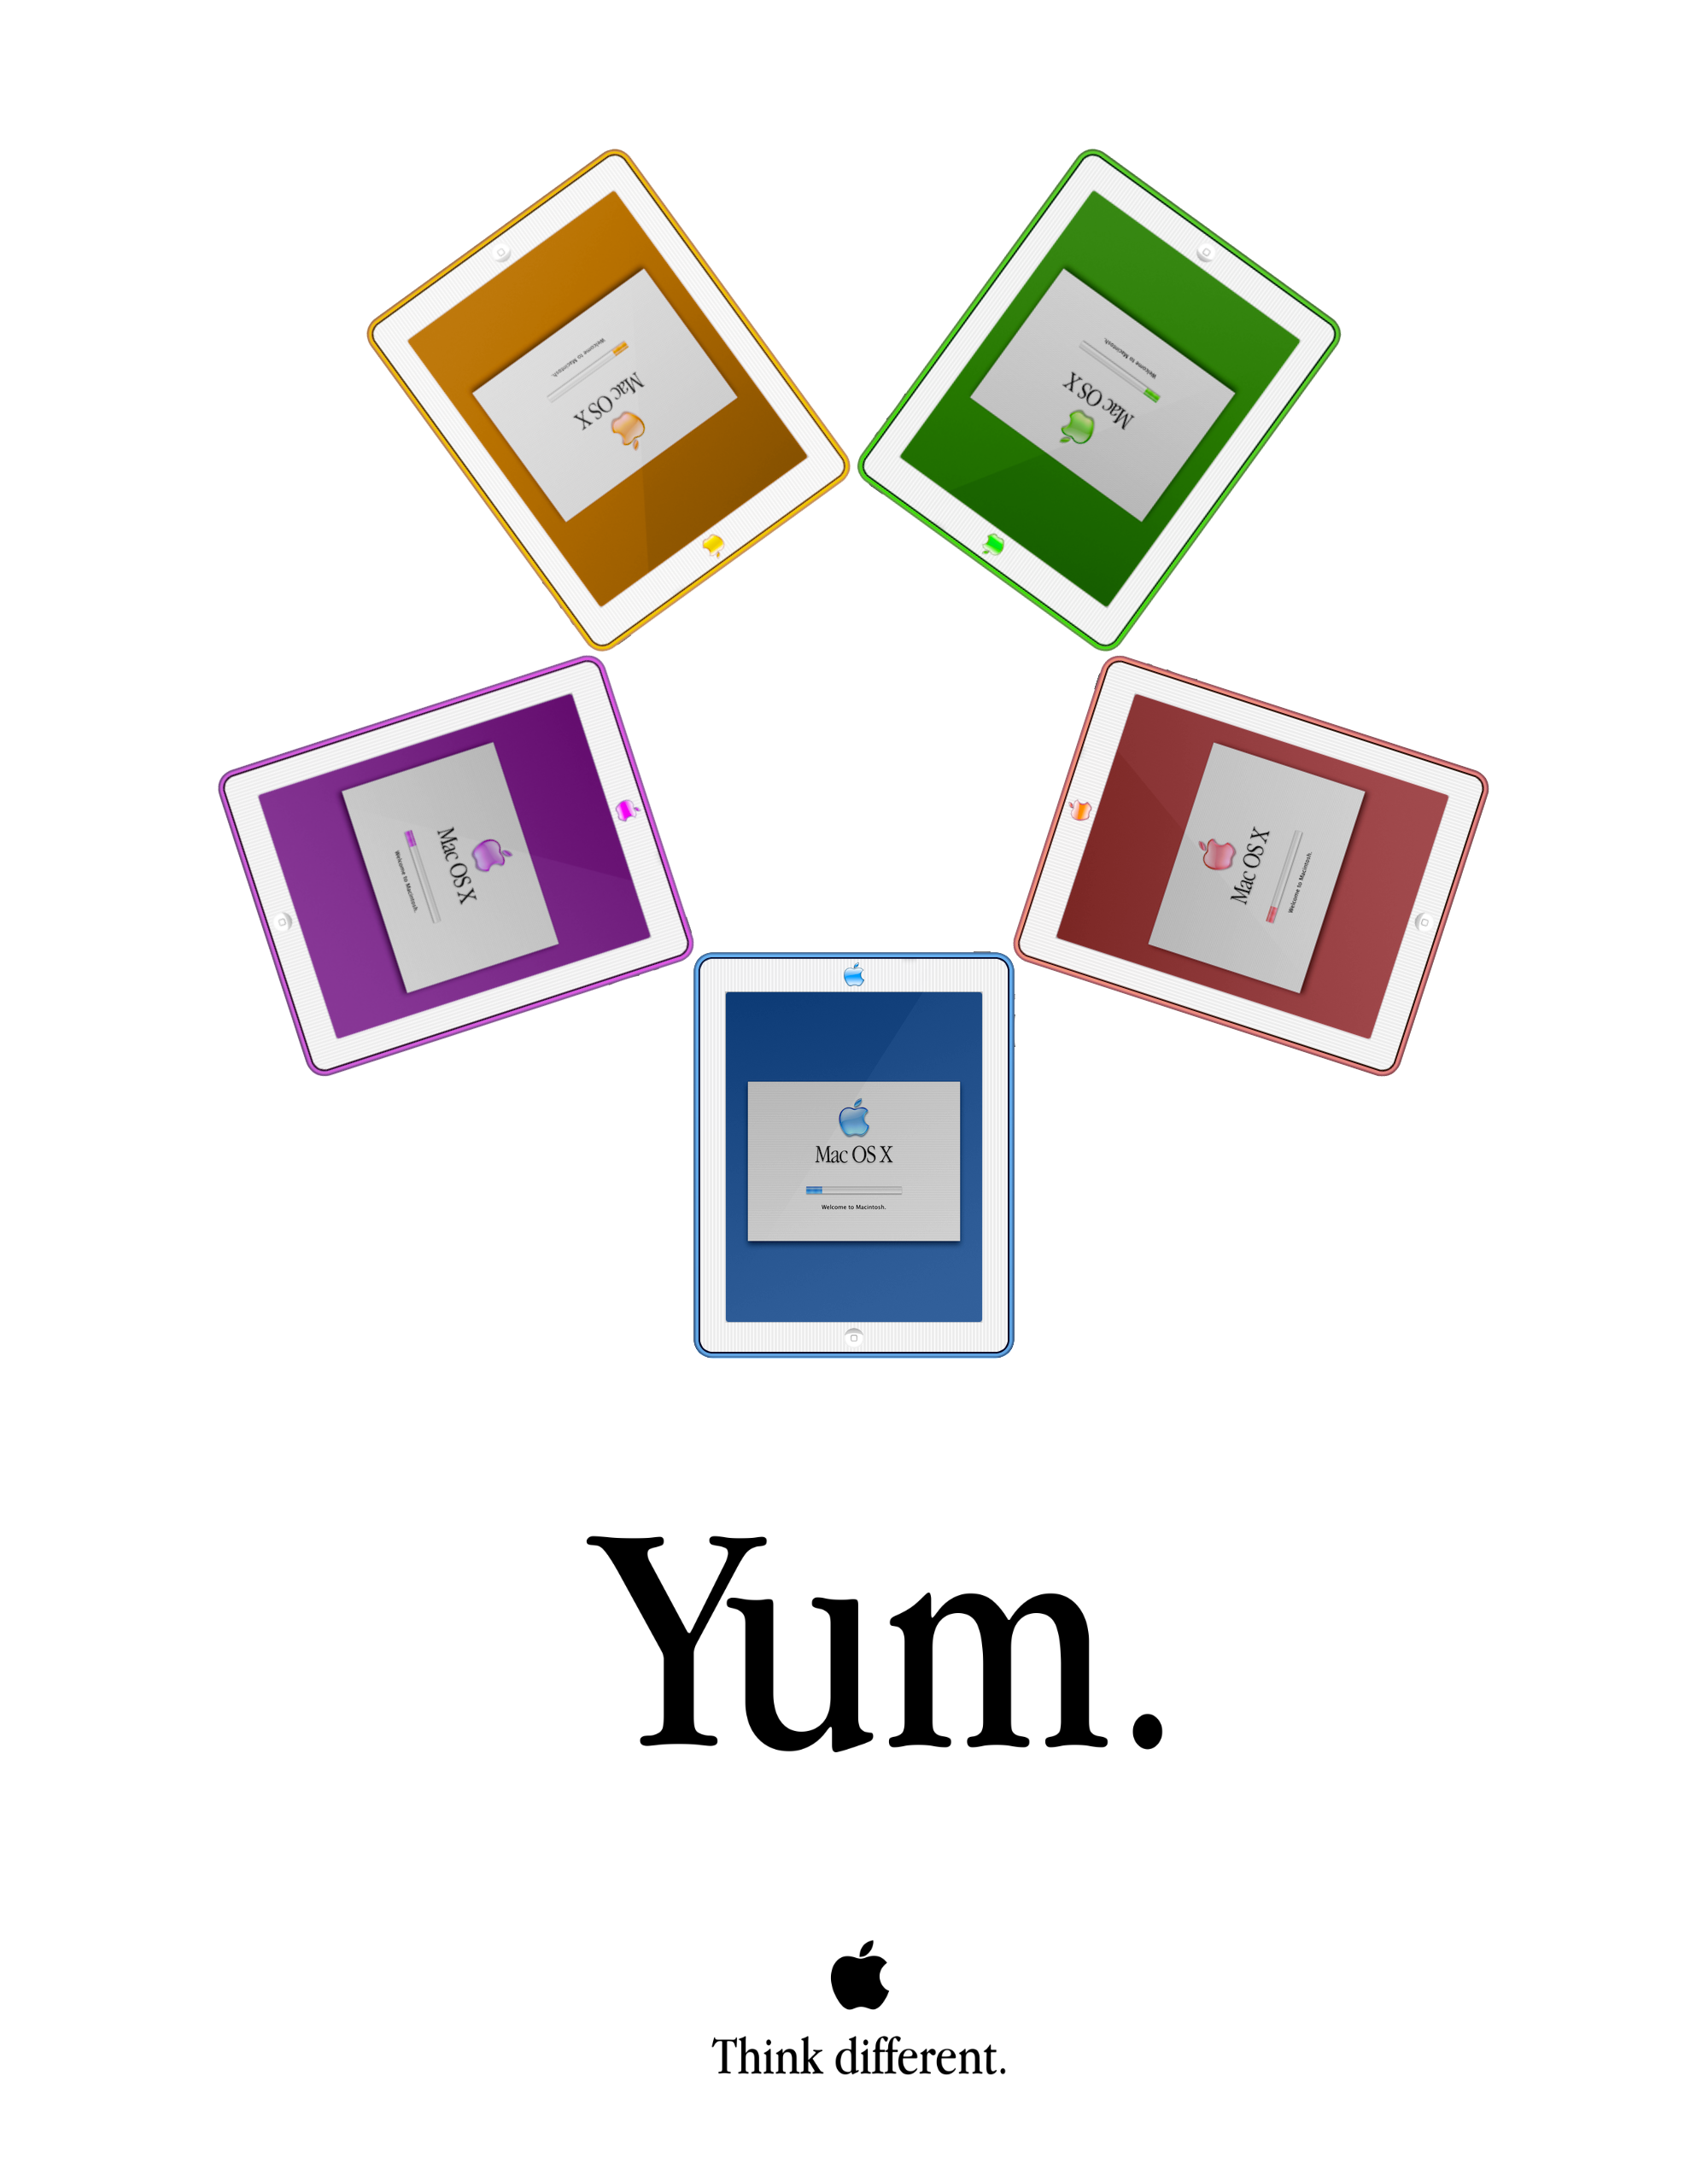 Five brightly colored iPads in the iMac five color poster design with the title “Yum.” followed by the Apple logo and “Think different.”